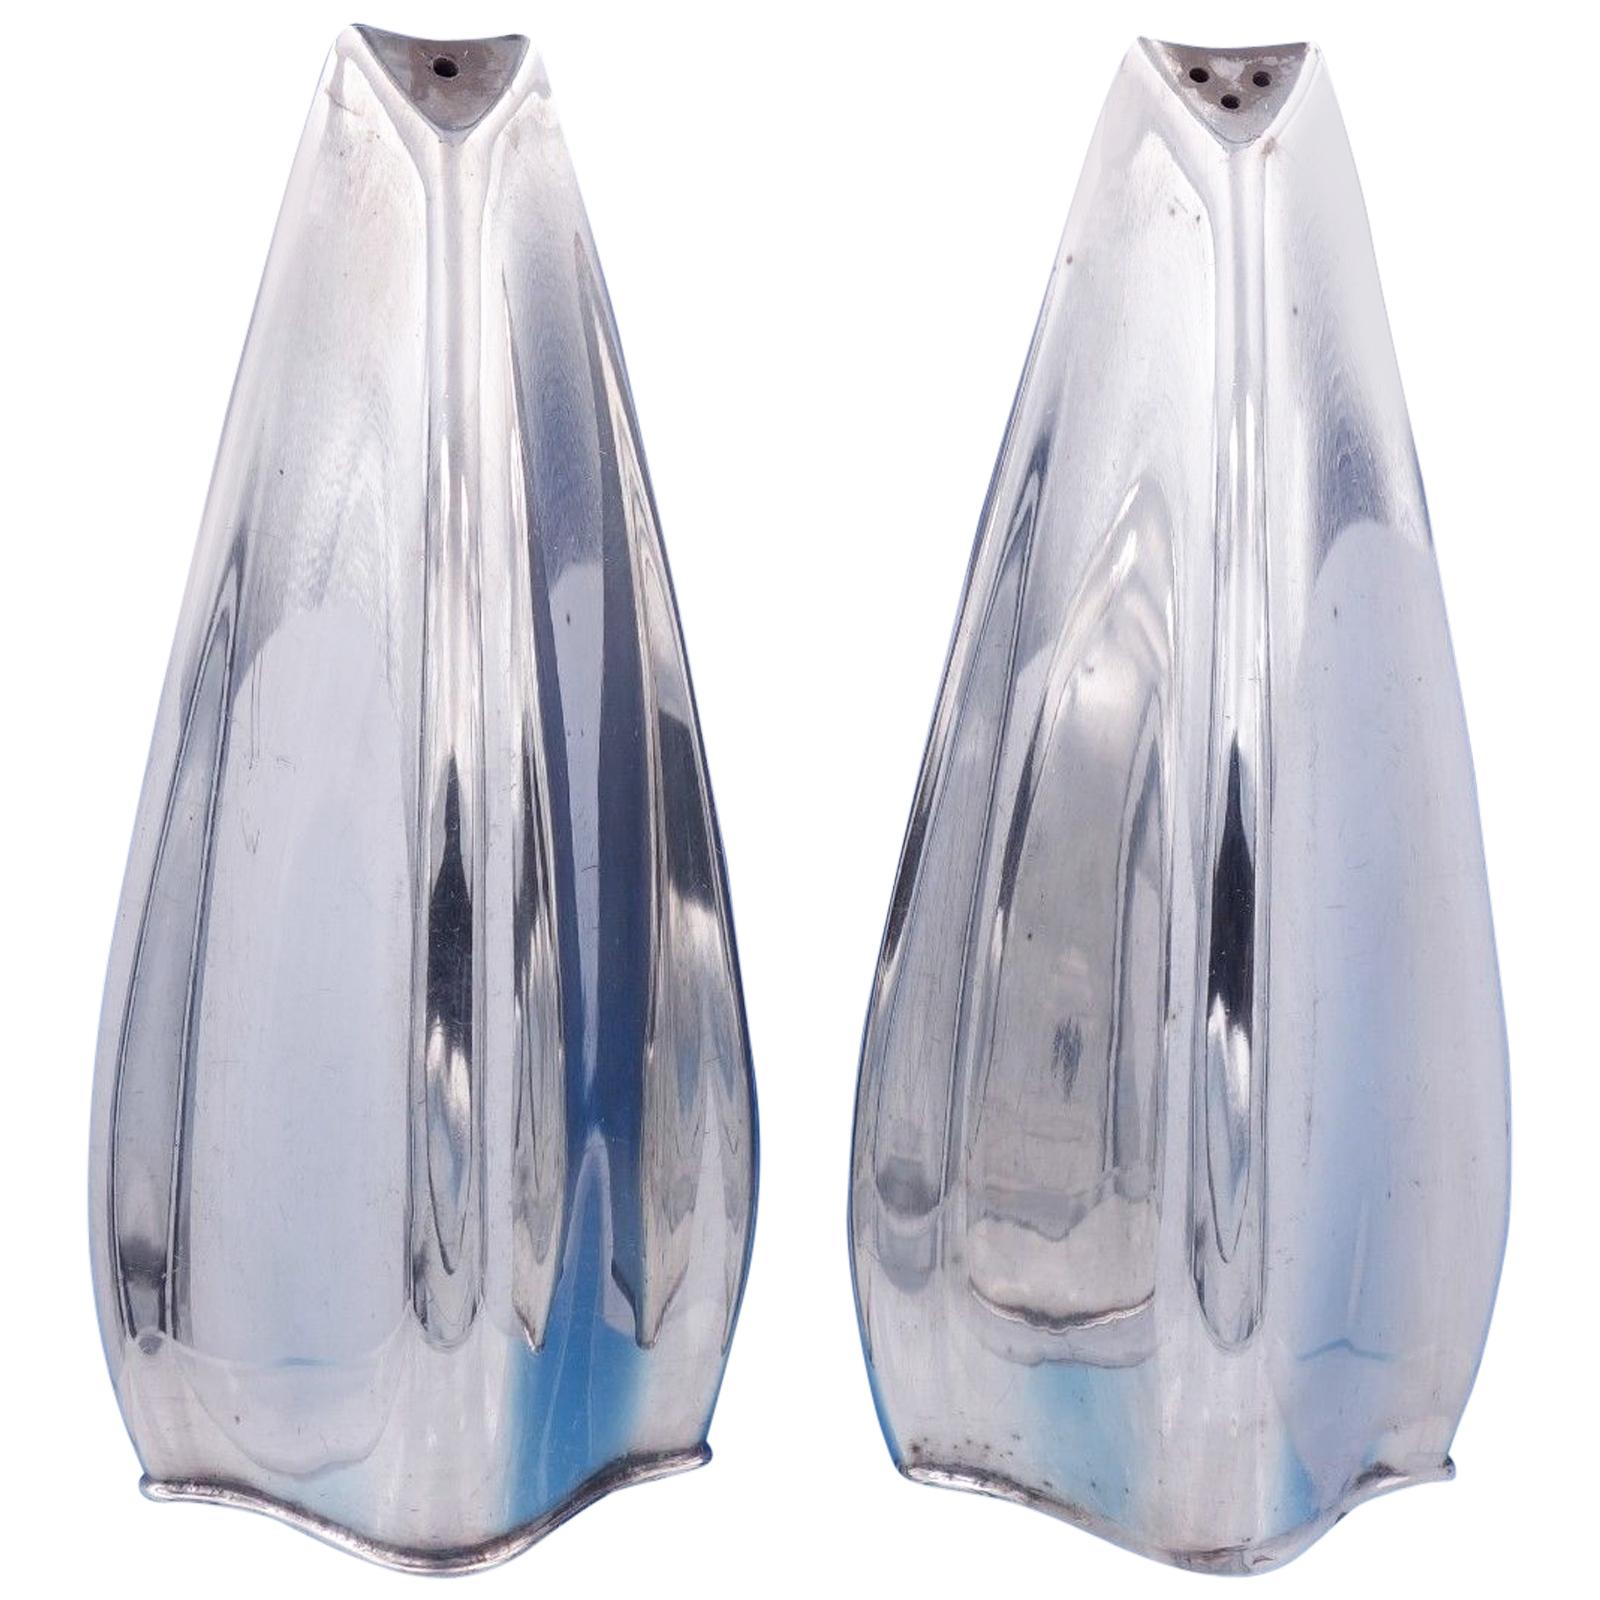 E. Dragsted Danish Sterling Silver Salt and Pepper Shaker Set 2-Piece